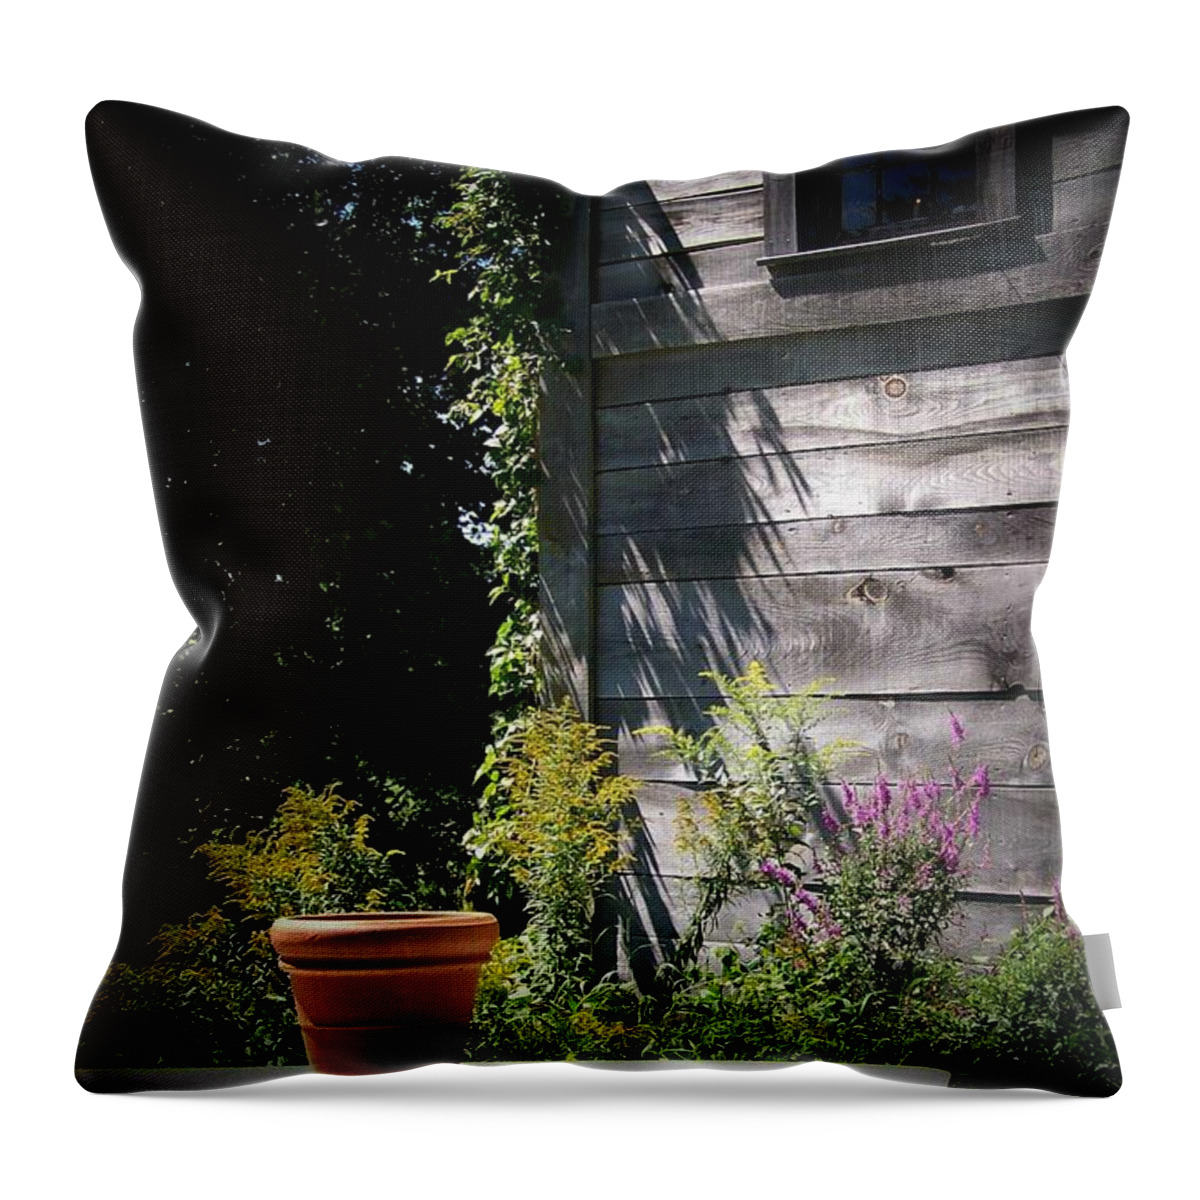 Photography Throw Pillow featuring the digital art Villagio by Barbara S Nickerson